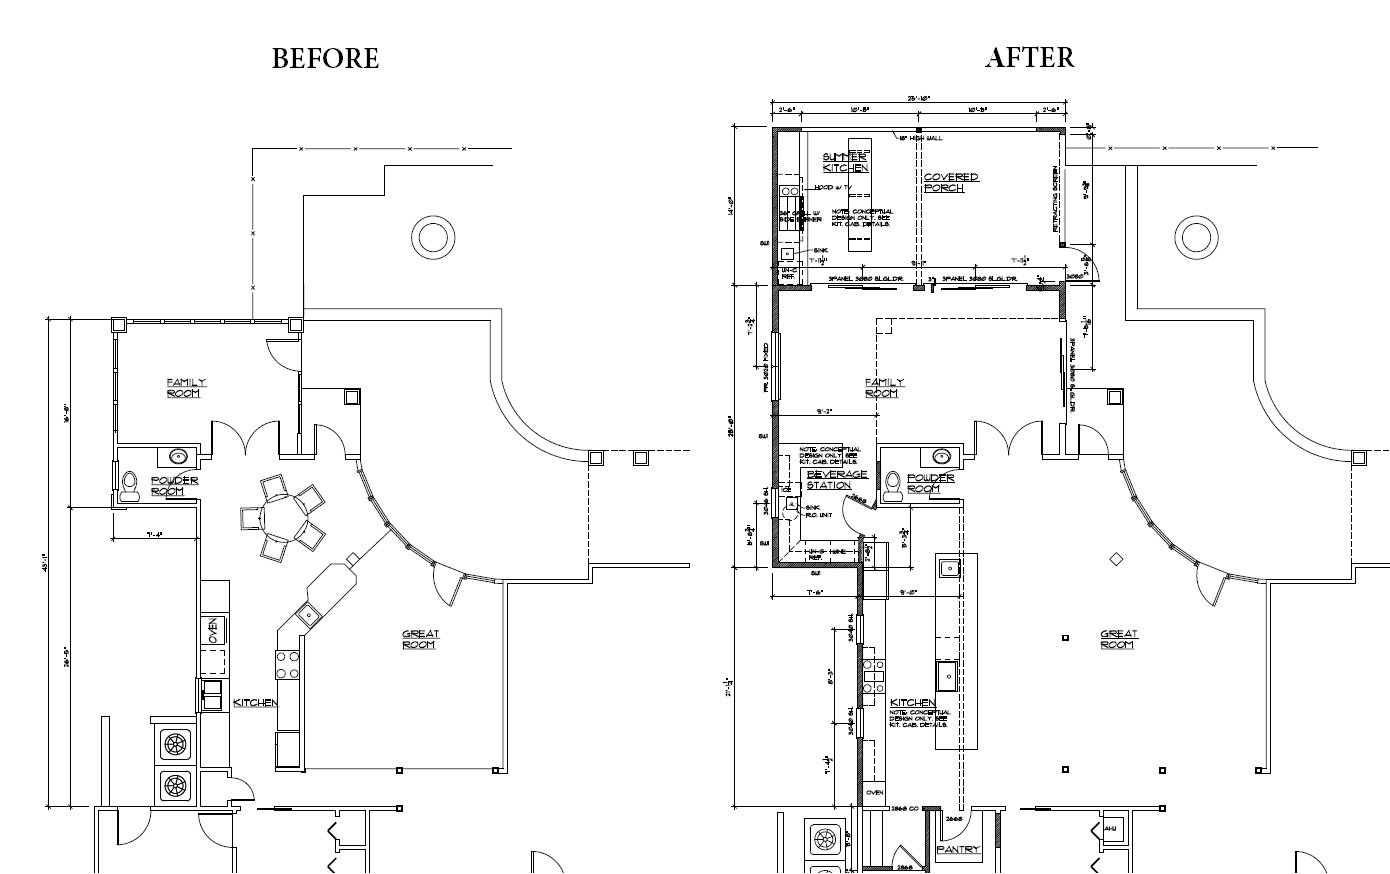 The floor plan: Before (left) and After (right)